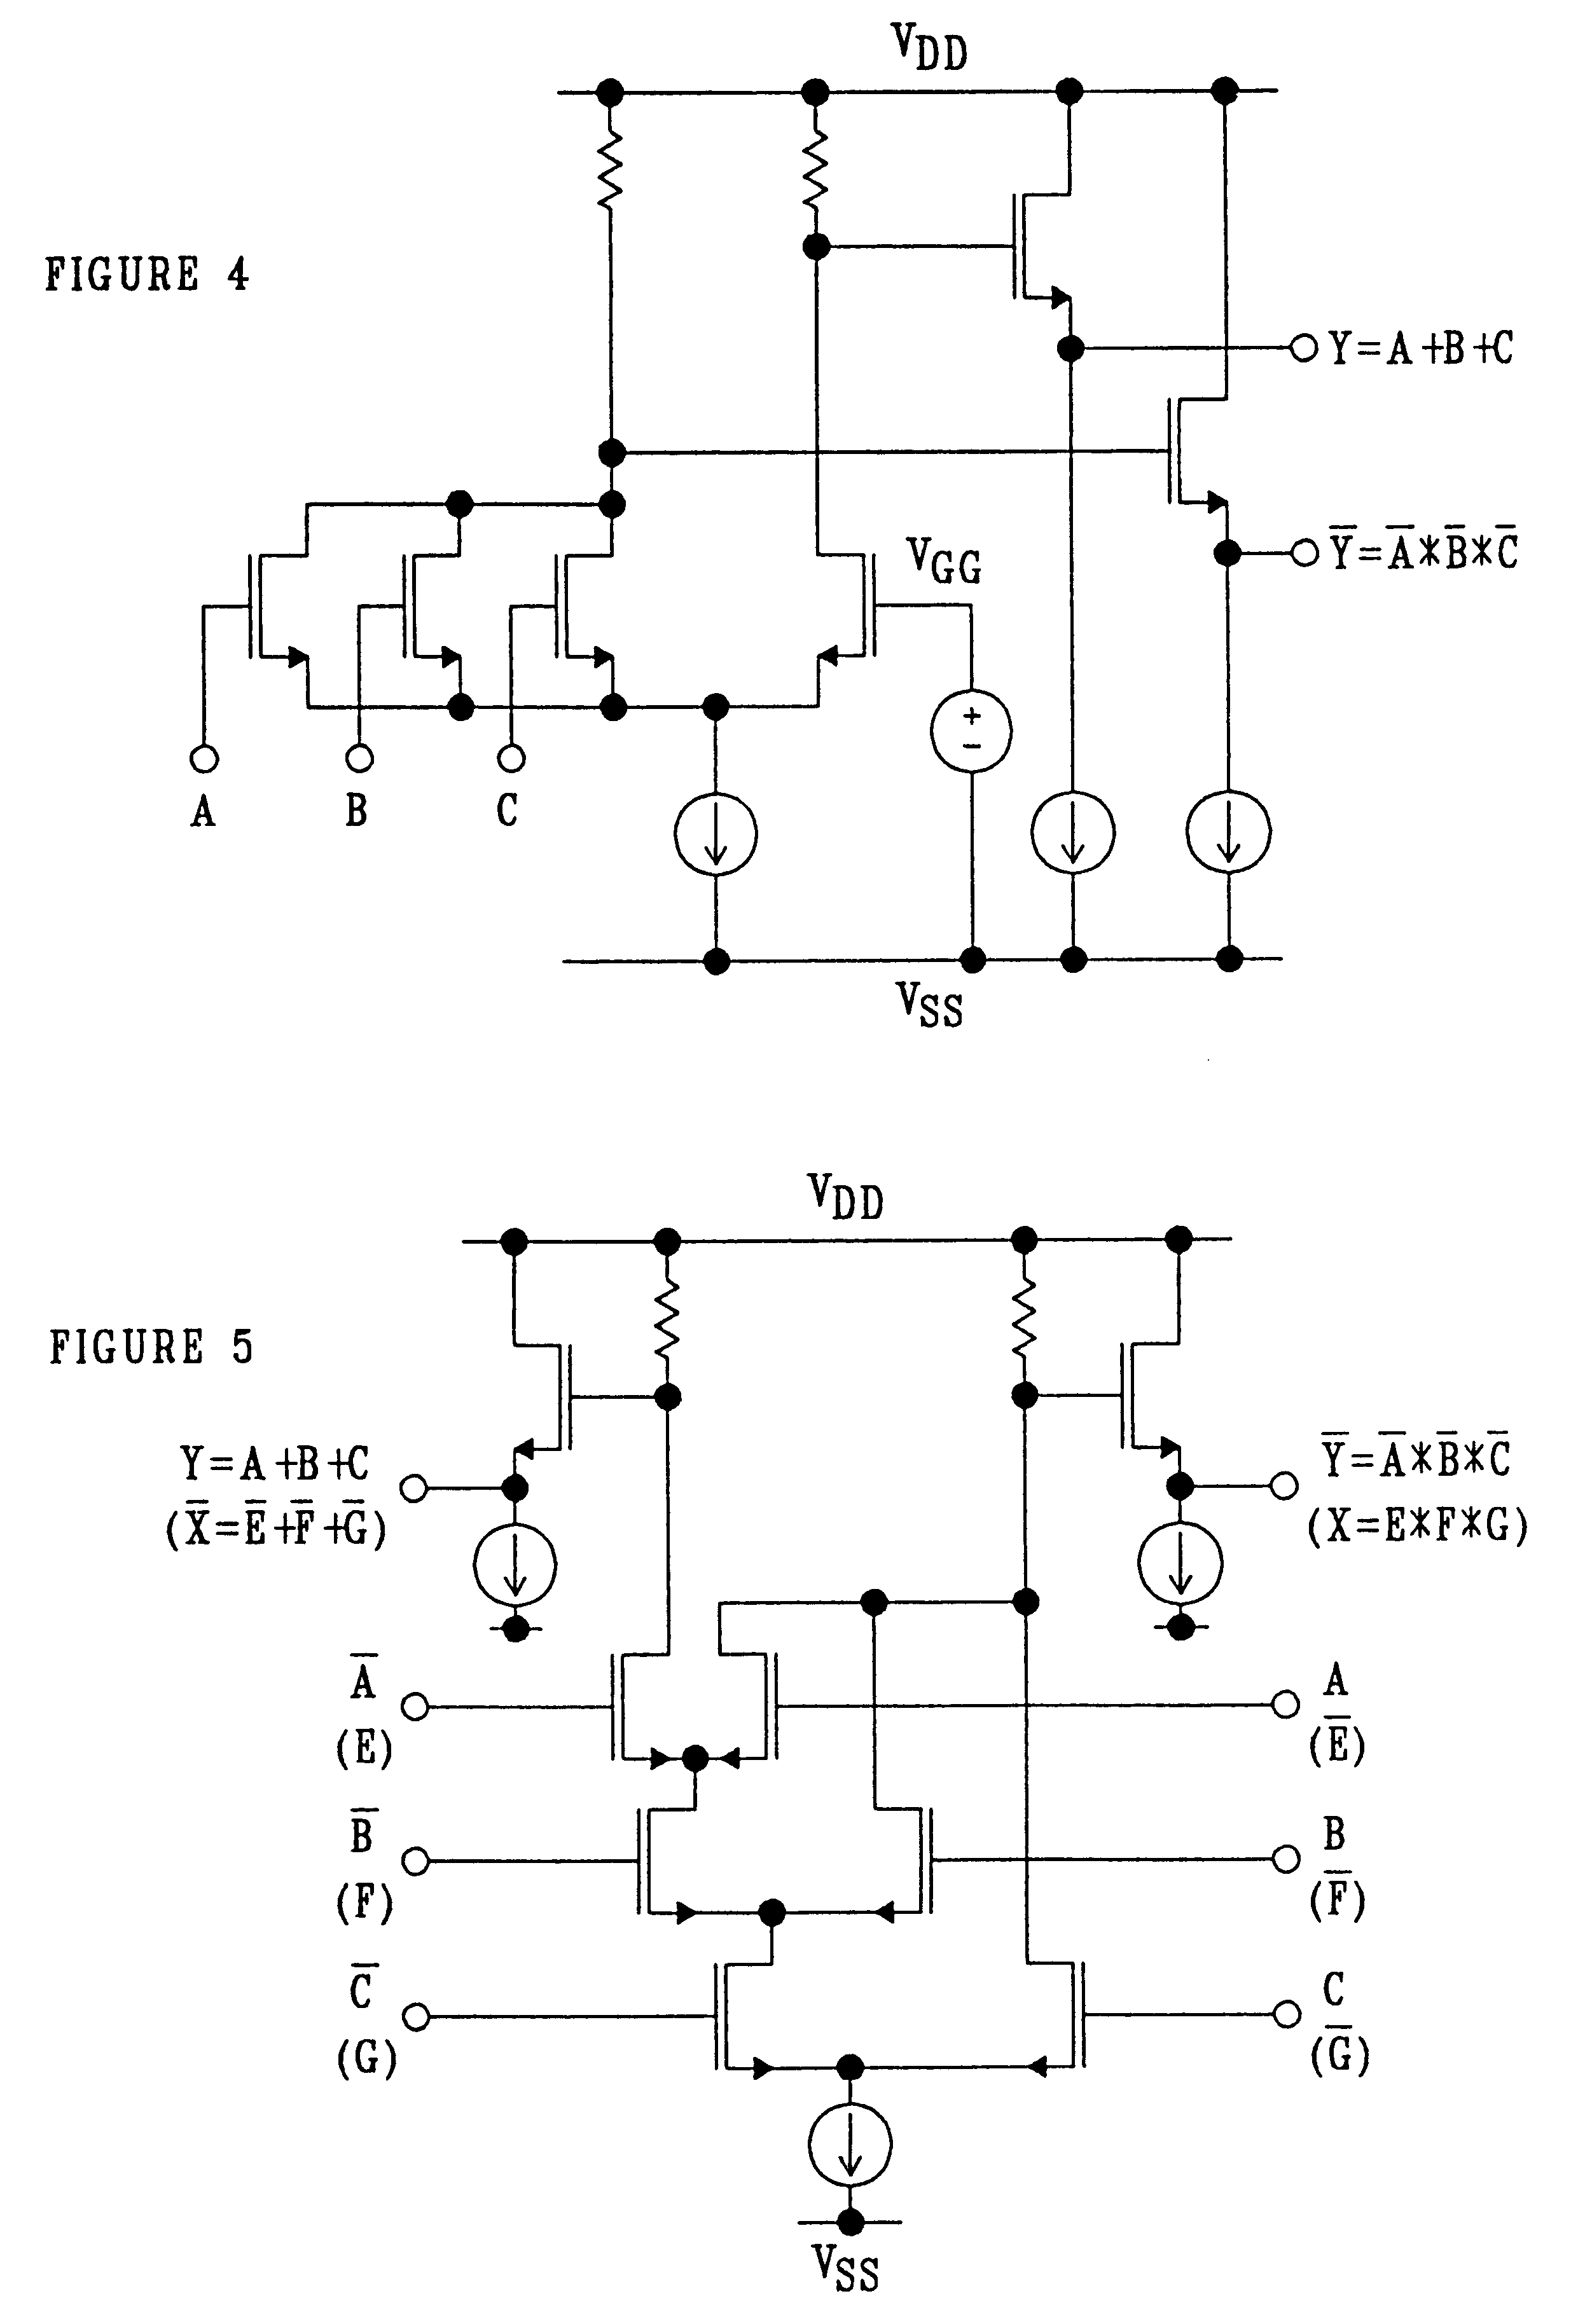 Source-coupled logic with reference controlled inputs